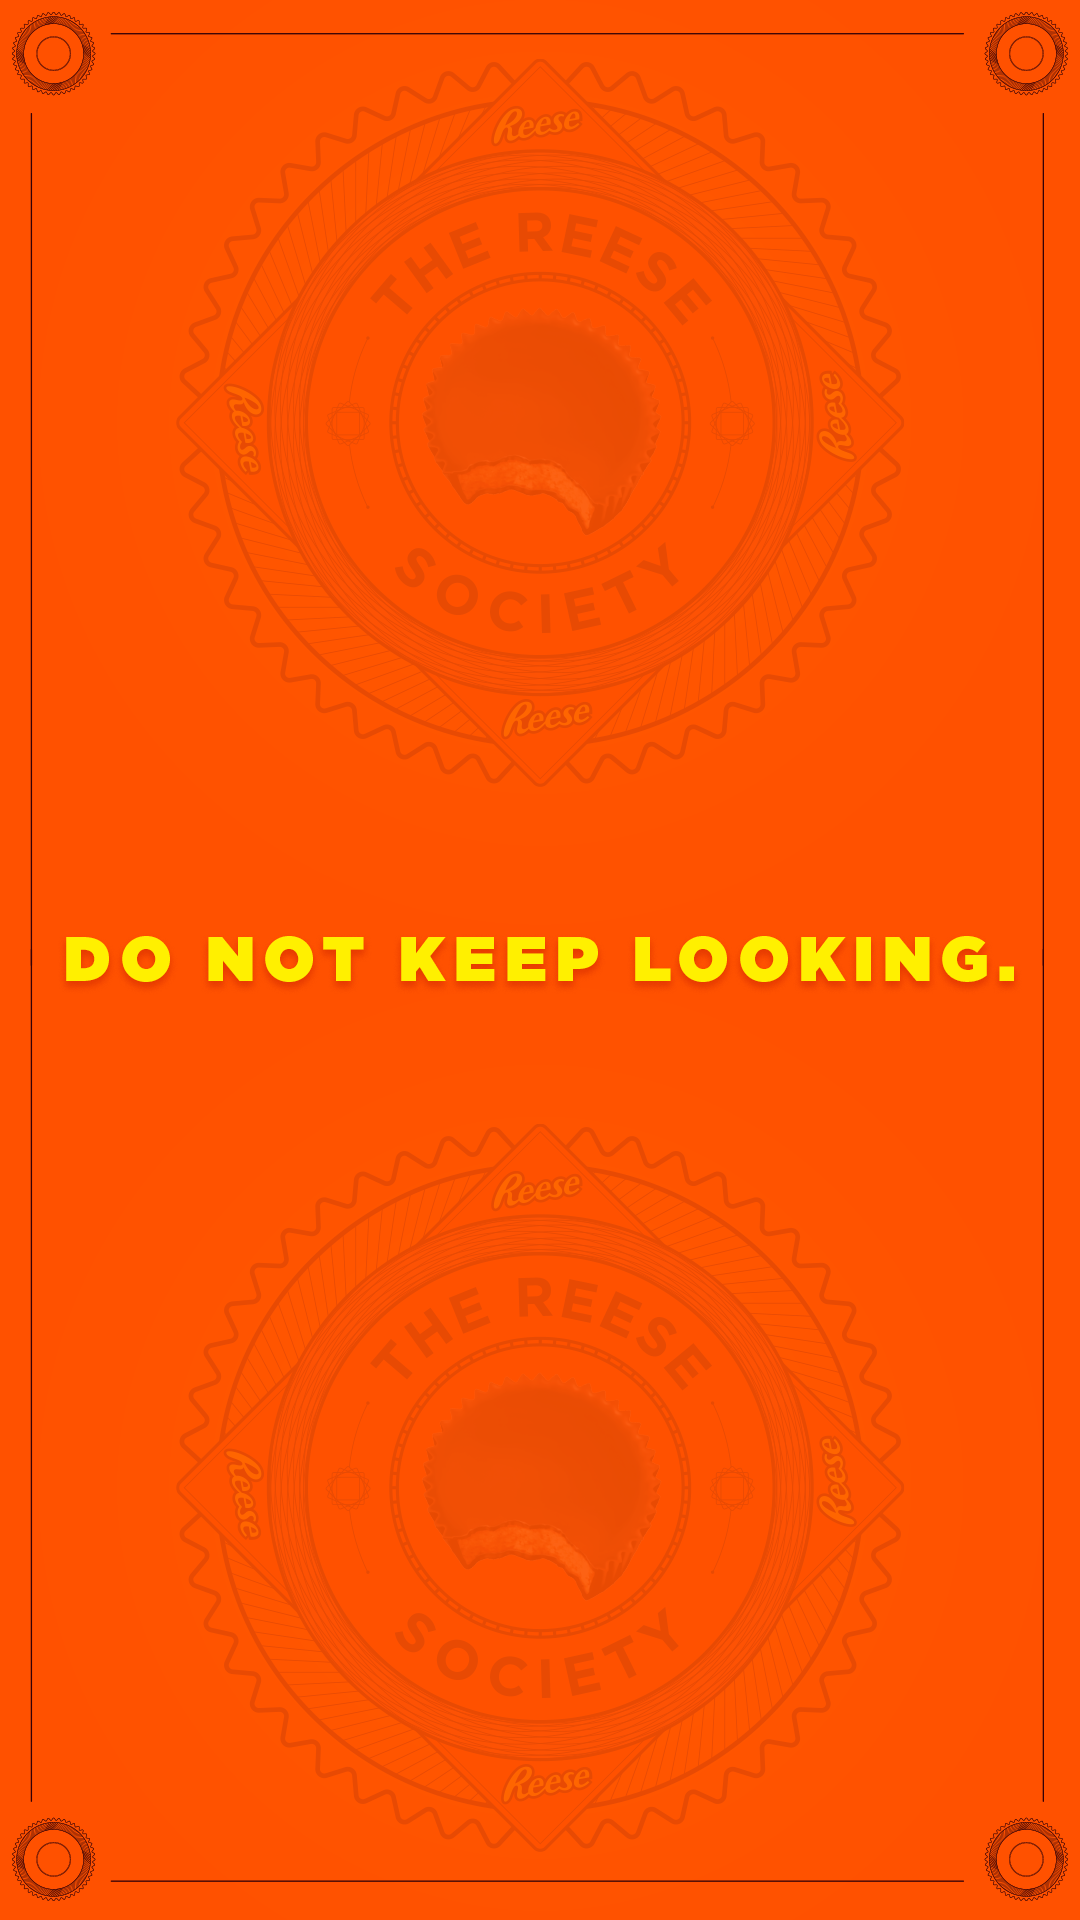 Reese-Society-IG_0033_Do-not-keep-looking.png